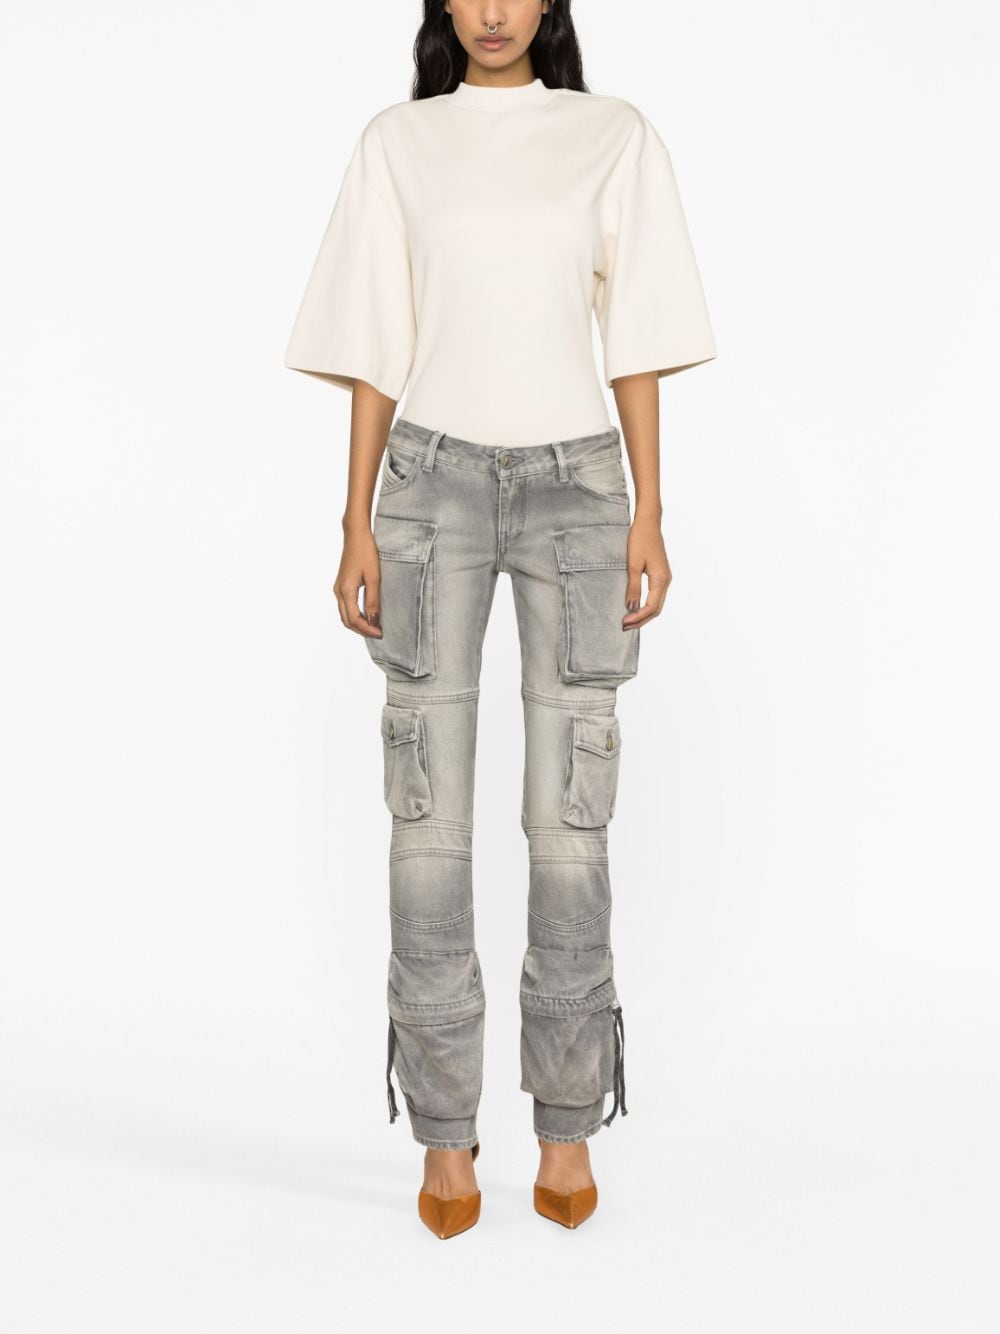 Grey Pants for Women - FW23 Collection